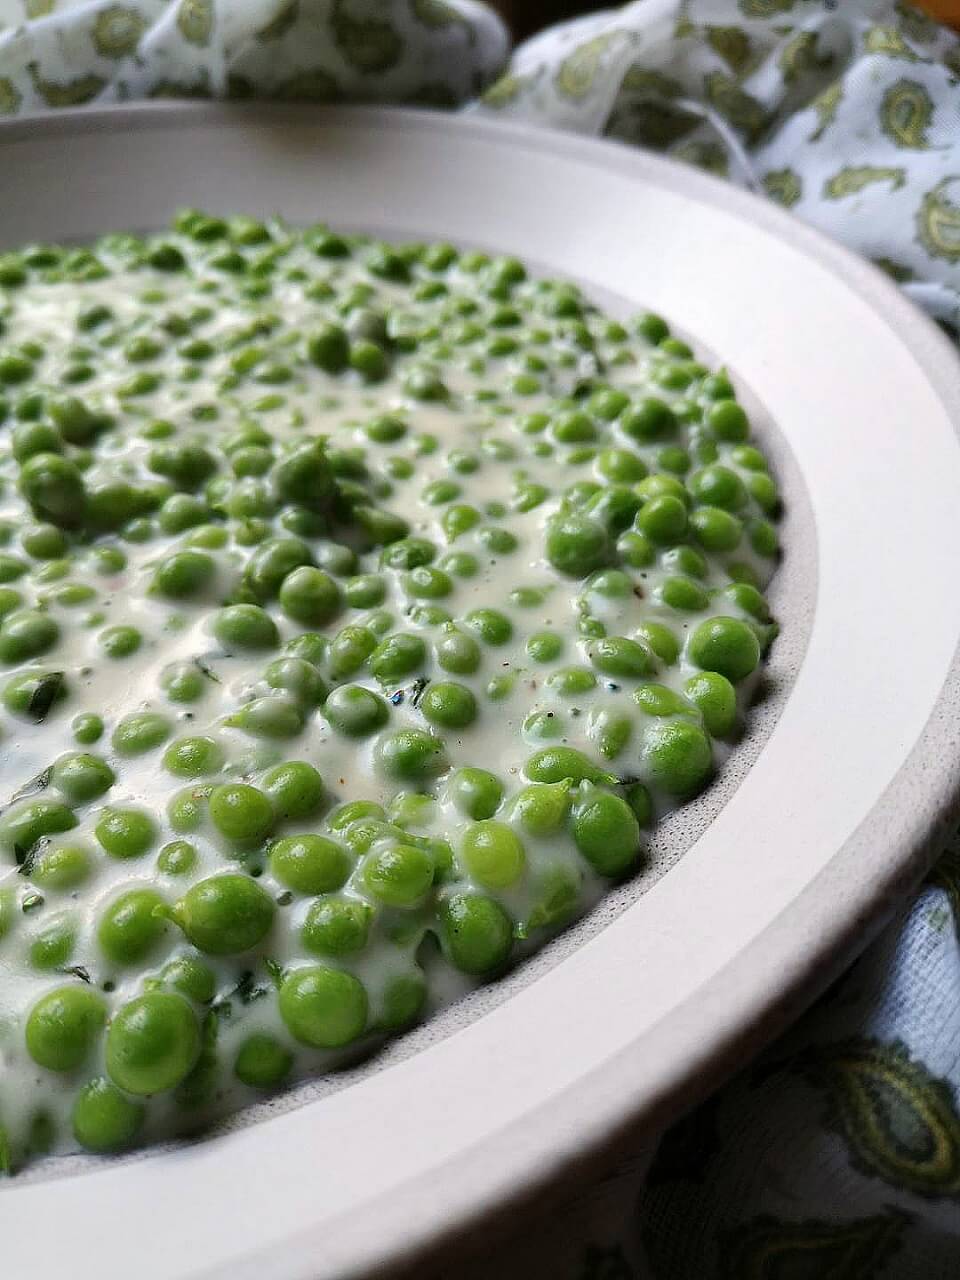 A bowl of green peas in a creamy sauce.